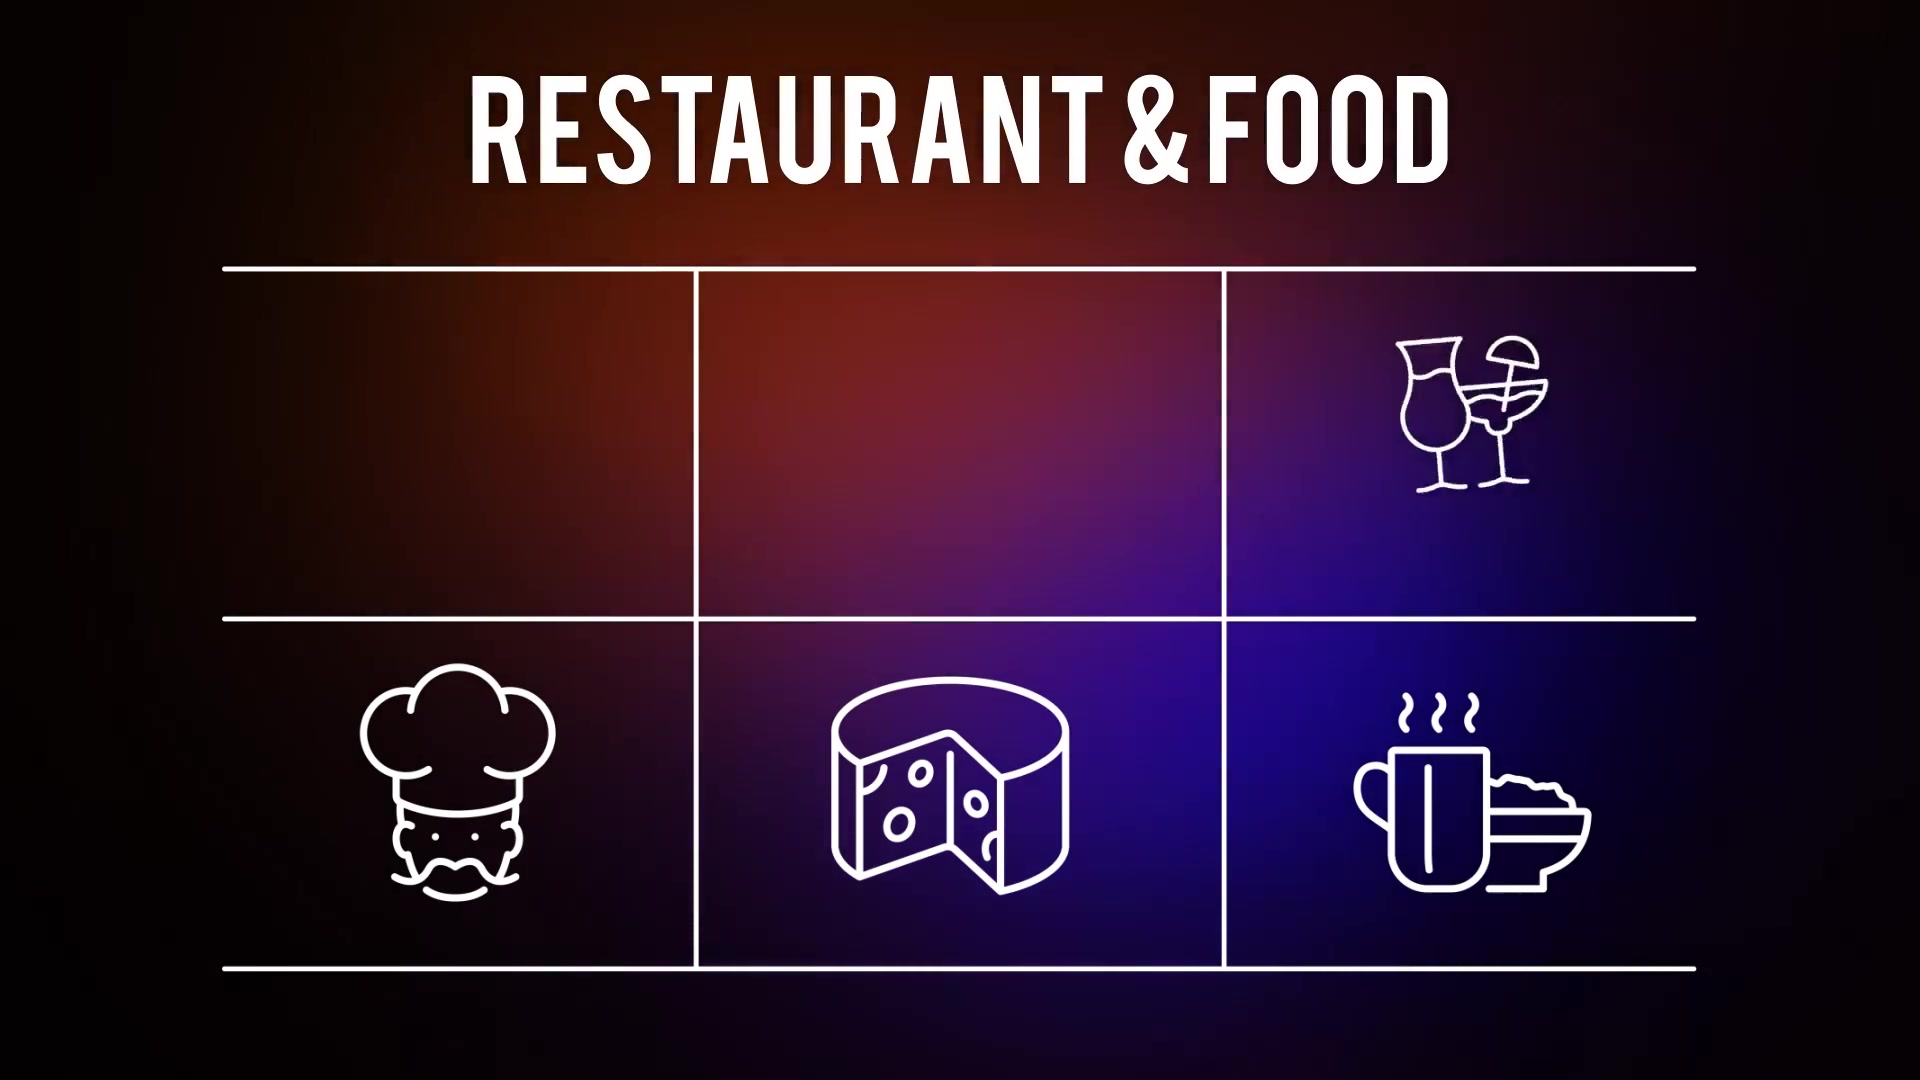 Restaurant And Food 25 Outline Icons - Download Videohive 23195194